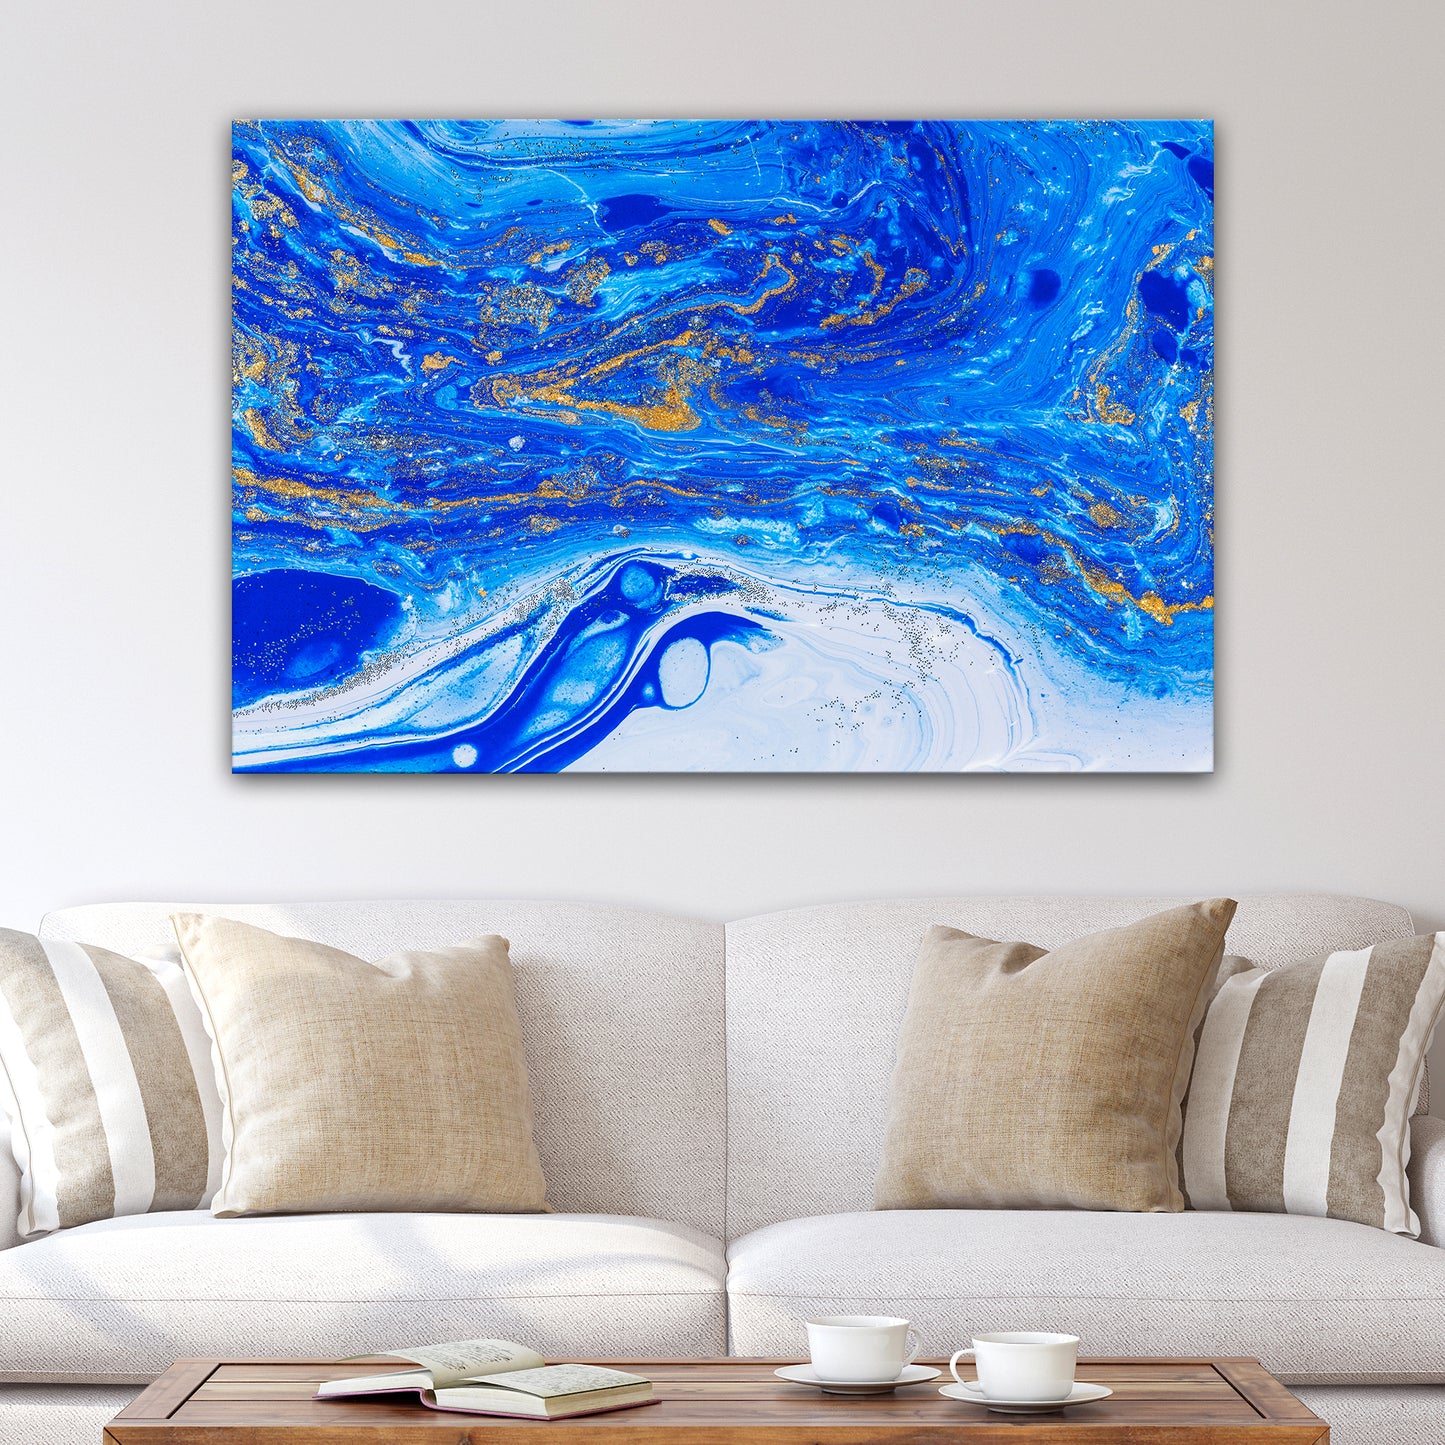 Abstract Golden Sea - Image by Tailored Canvases